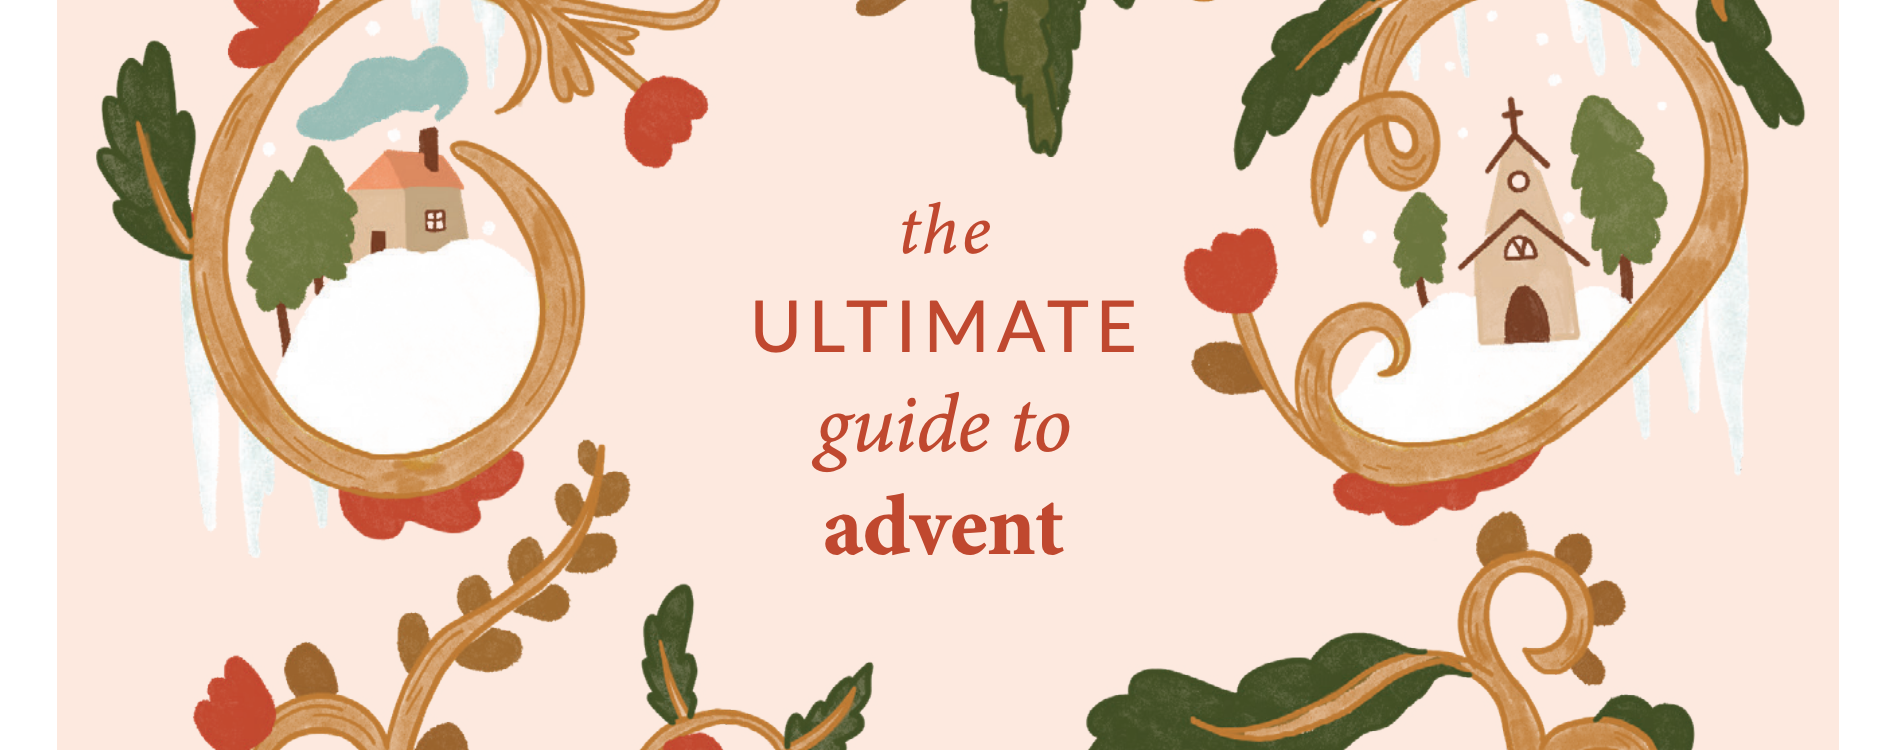 The ultimate guide to advent 2020